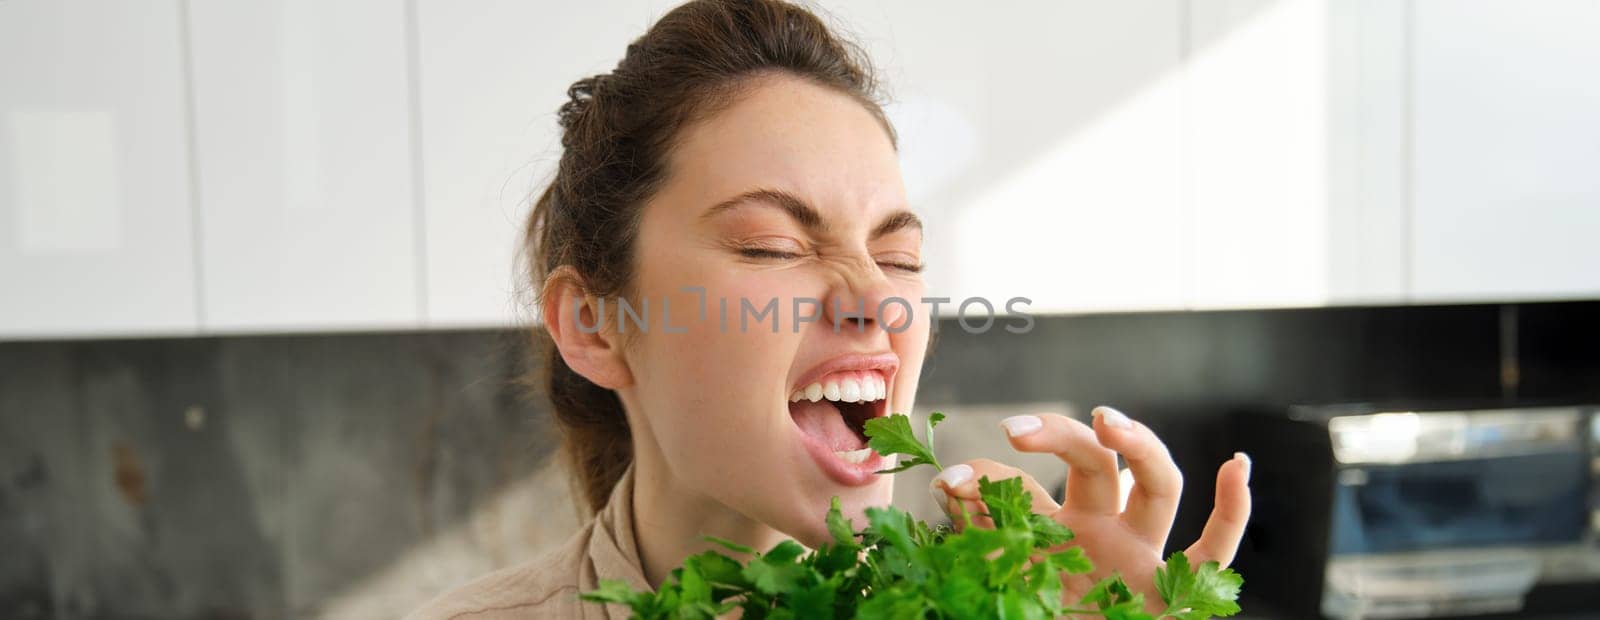 Portrait of attractive woman biting parsley, eating fresh vegetables and herbs in the kitchen, enjoying healthy lifestyle and food.